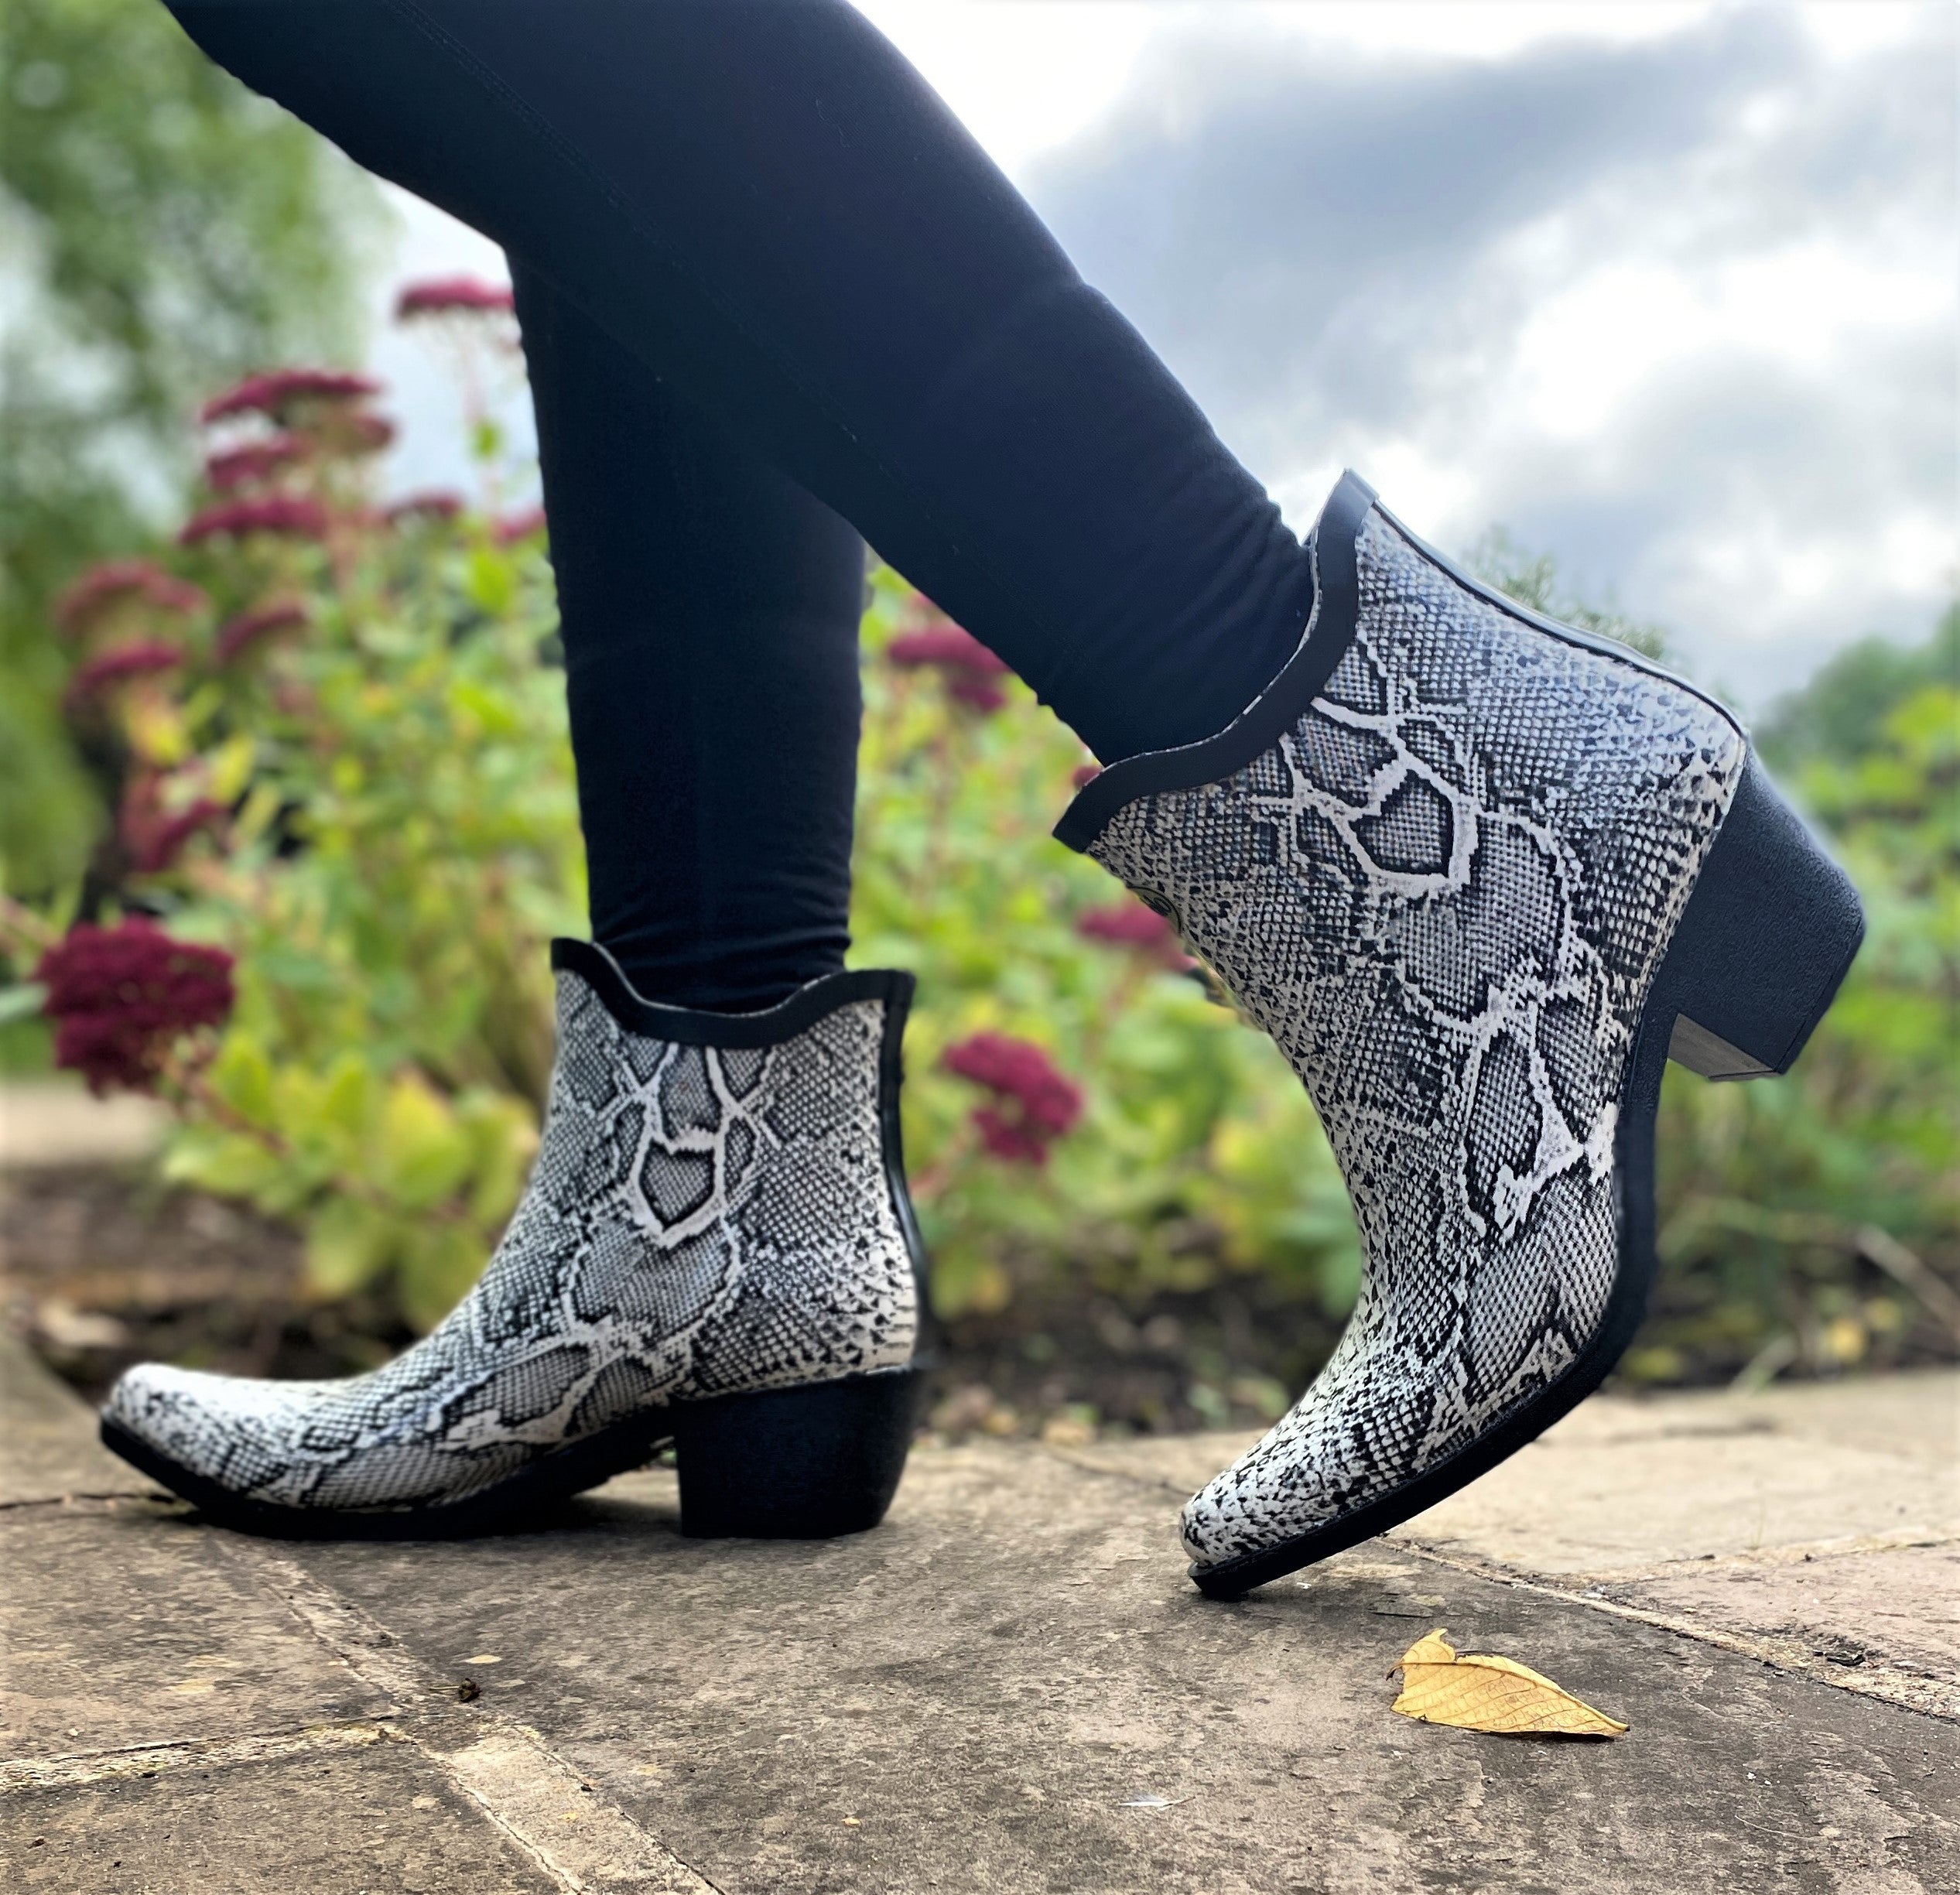 Chic and stylish, these Talolo Women's Lizzie snake print black and white pointed cowboy welly ankle boots have a 3cm heel. Lined for comfort.